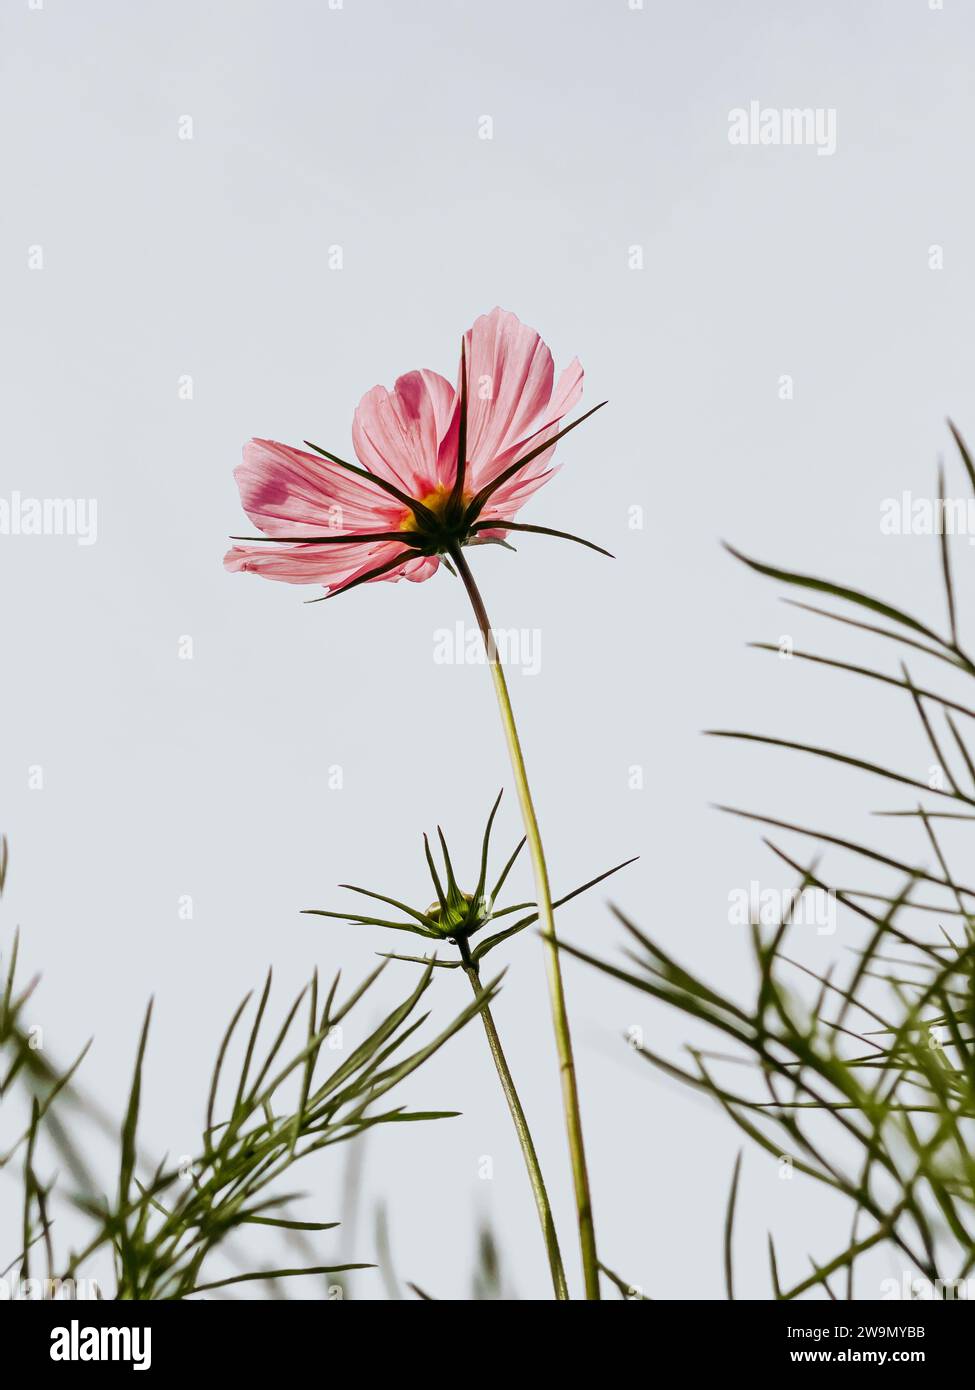 Close-up of a pink cosmos flower growing outdoors Stock Photo